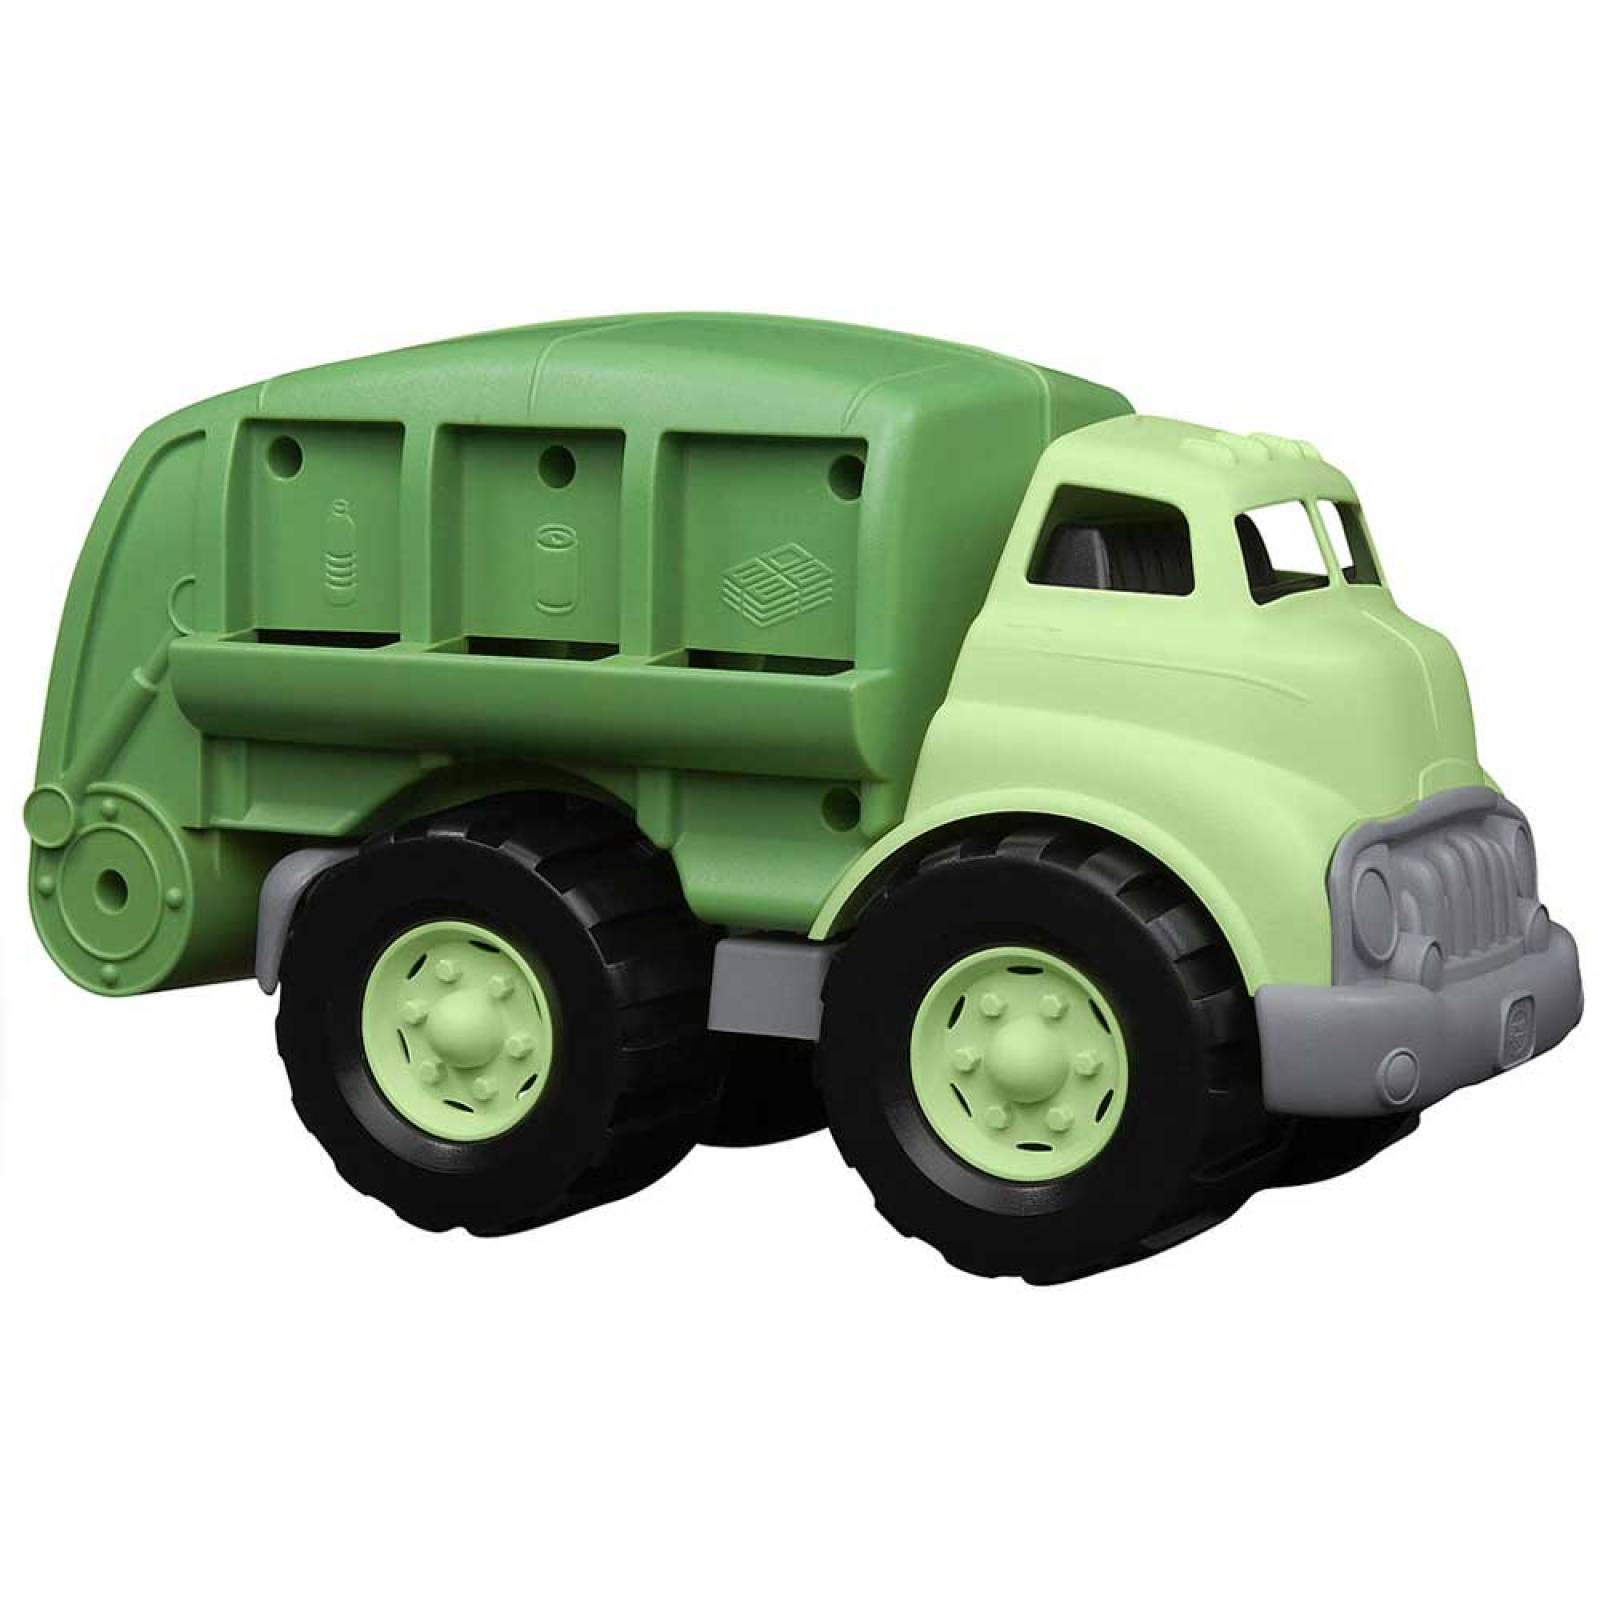 Recycling Dustbin Truck - Green Toys Recycled Plastic 1+ thumbnails